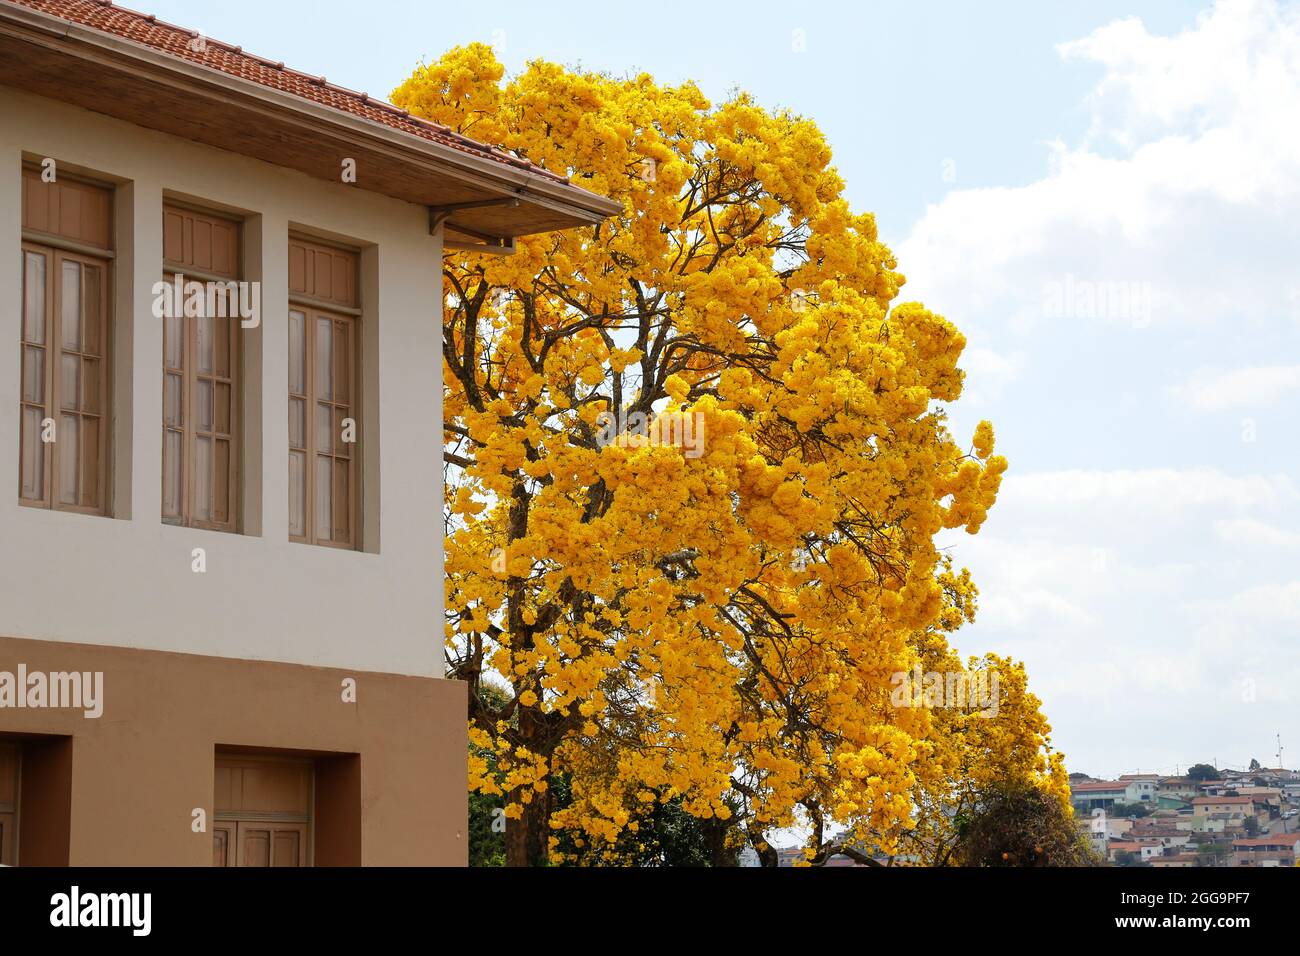 yellow ipe tree integrated into the city environment Stock Photo